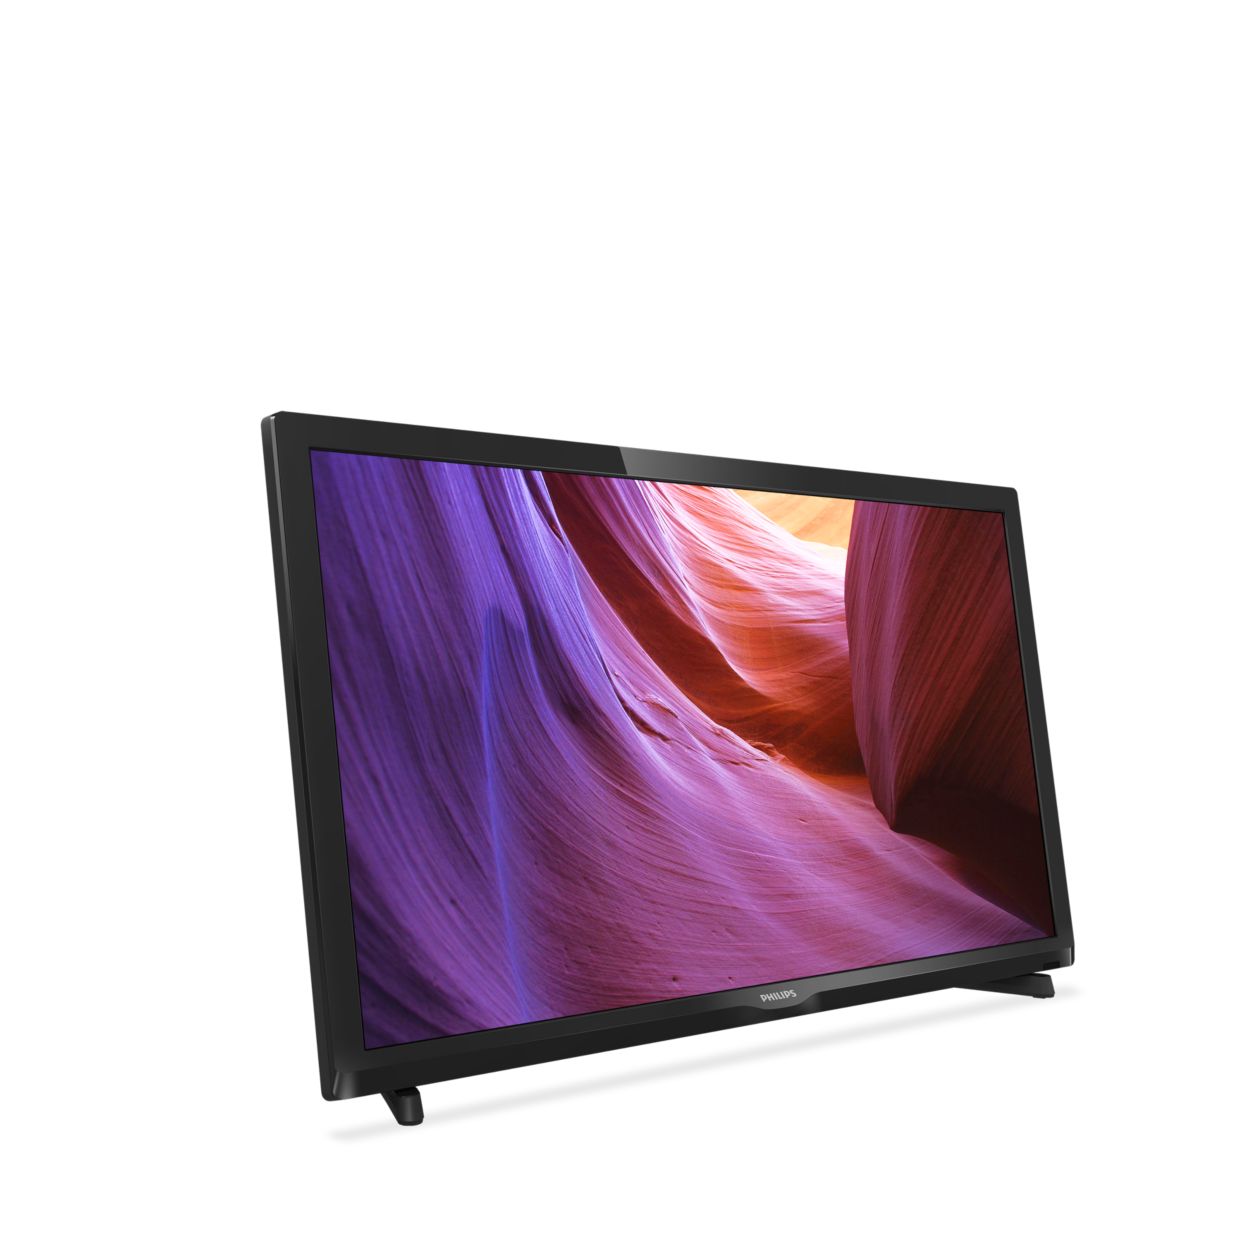 Sprede aften chef 4000 series Tyndt LED-TV 24PHT4000/12 | Philips